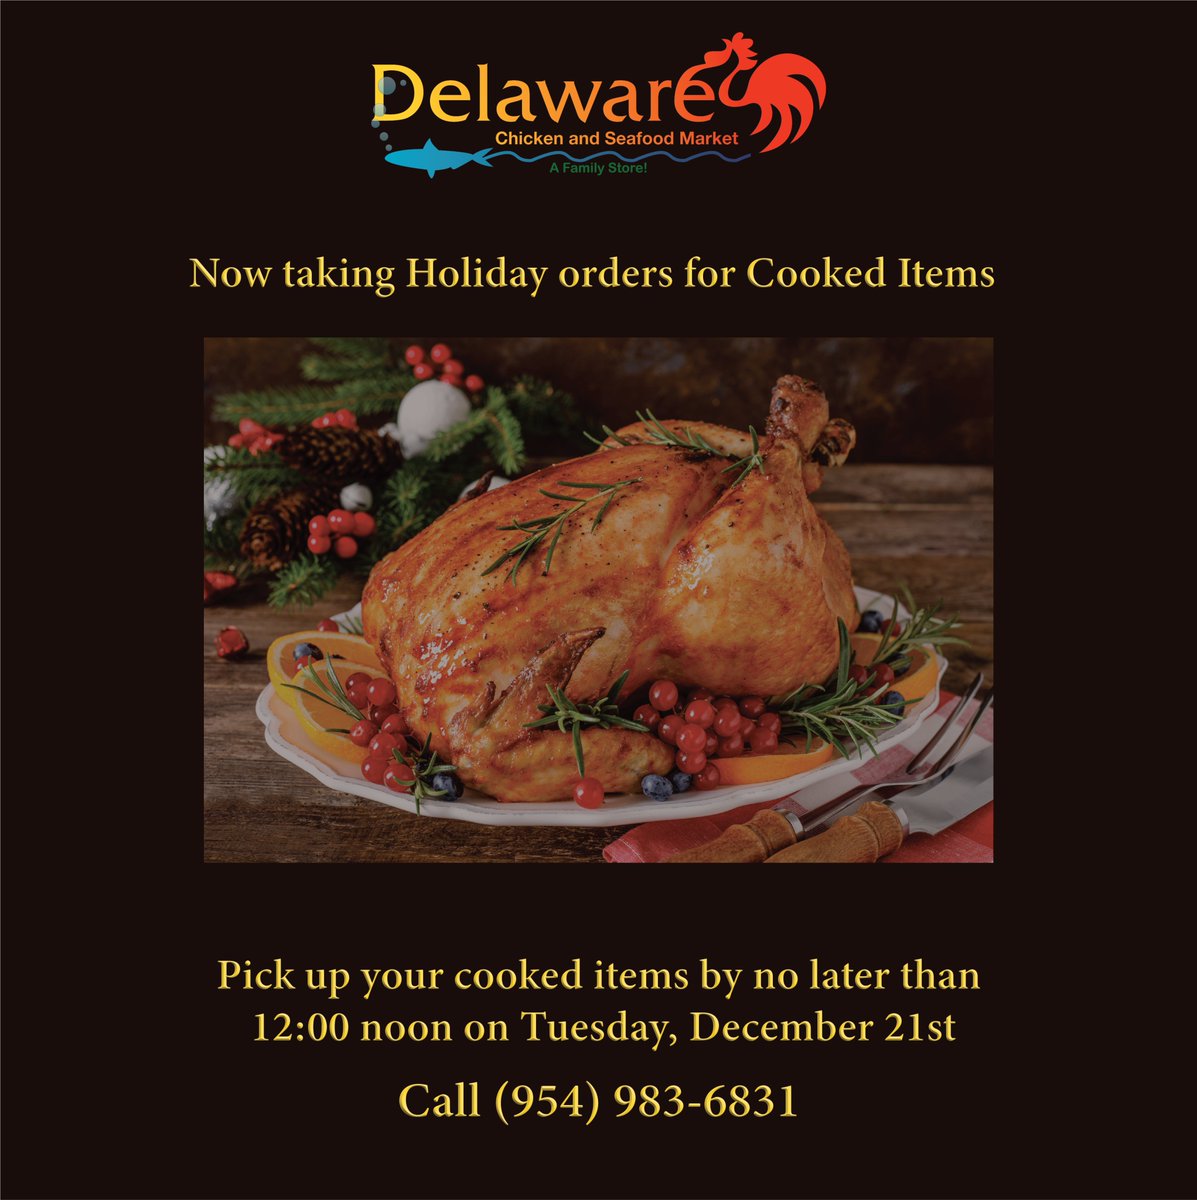 Delaware is now taking orders for cooked items this holiday. Whether you're looking for a rotisserie turkey, turkey breast, or any of our other hot or cooked items, give us a call. Deadline to pick up your cooked items is Dec. 21st. #Rotisserie #Turkey #HotItems